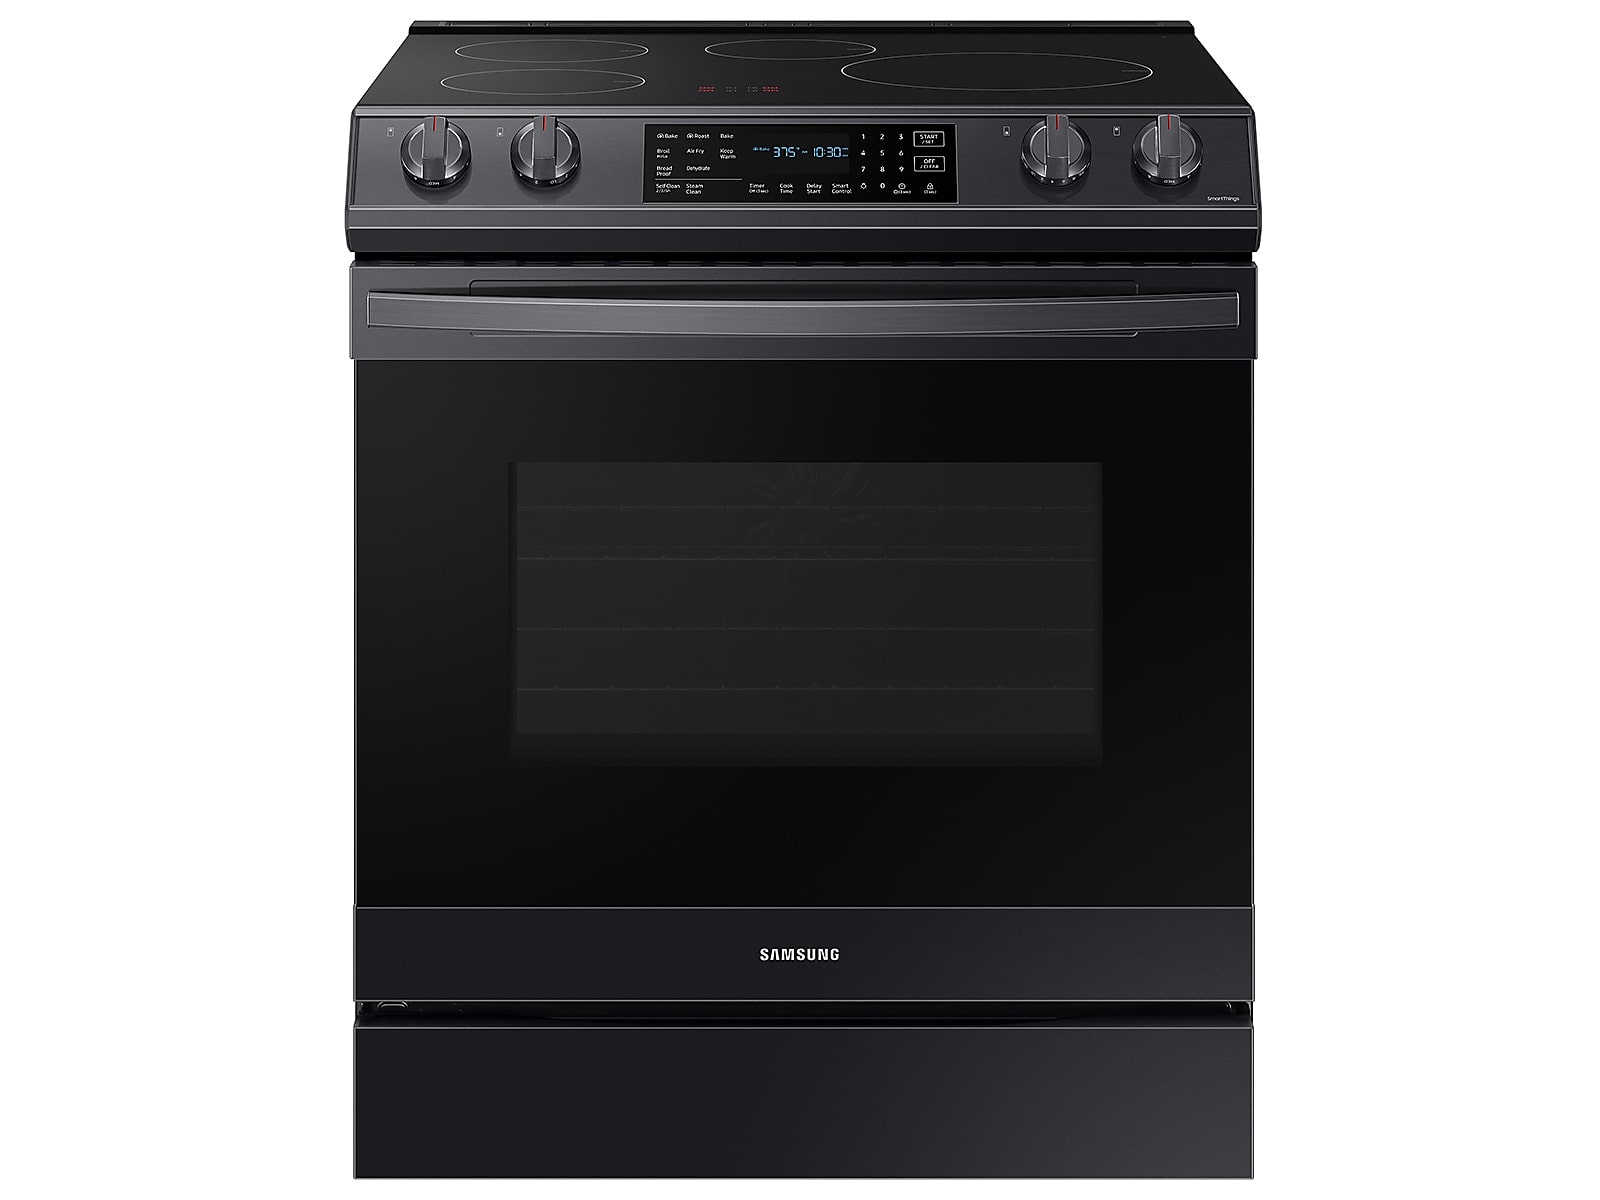 Samsung 6.3 cu. ft. Smart Rapid Heat Induction Slide-in Range with Air Fry & Convection+ in Silver(NE63B8611SS/AA)